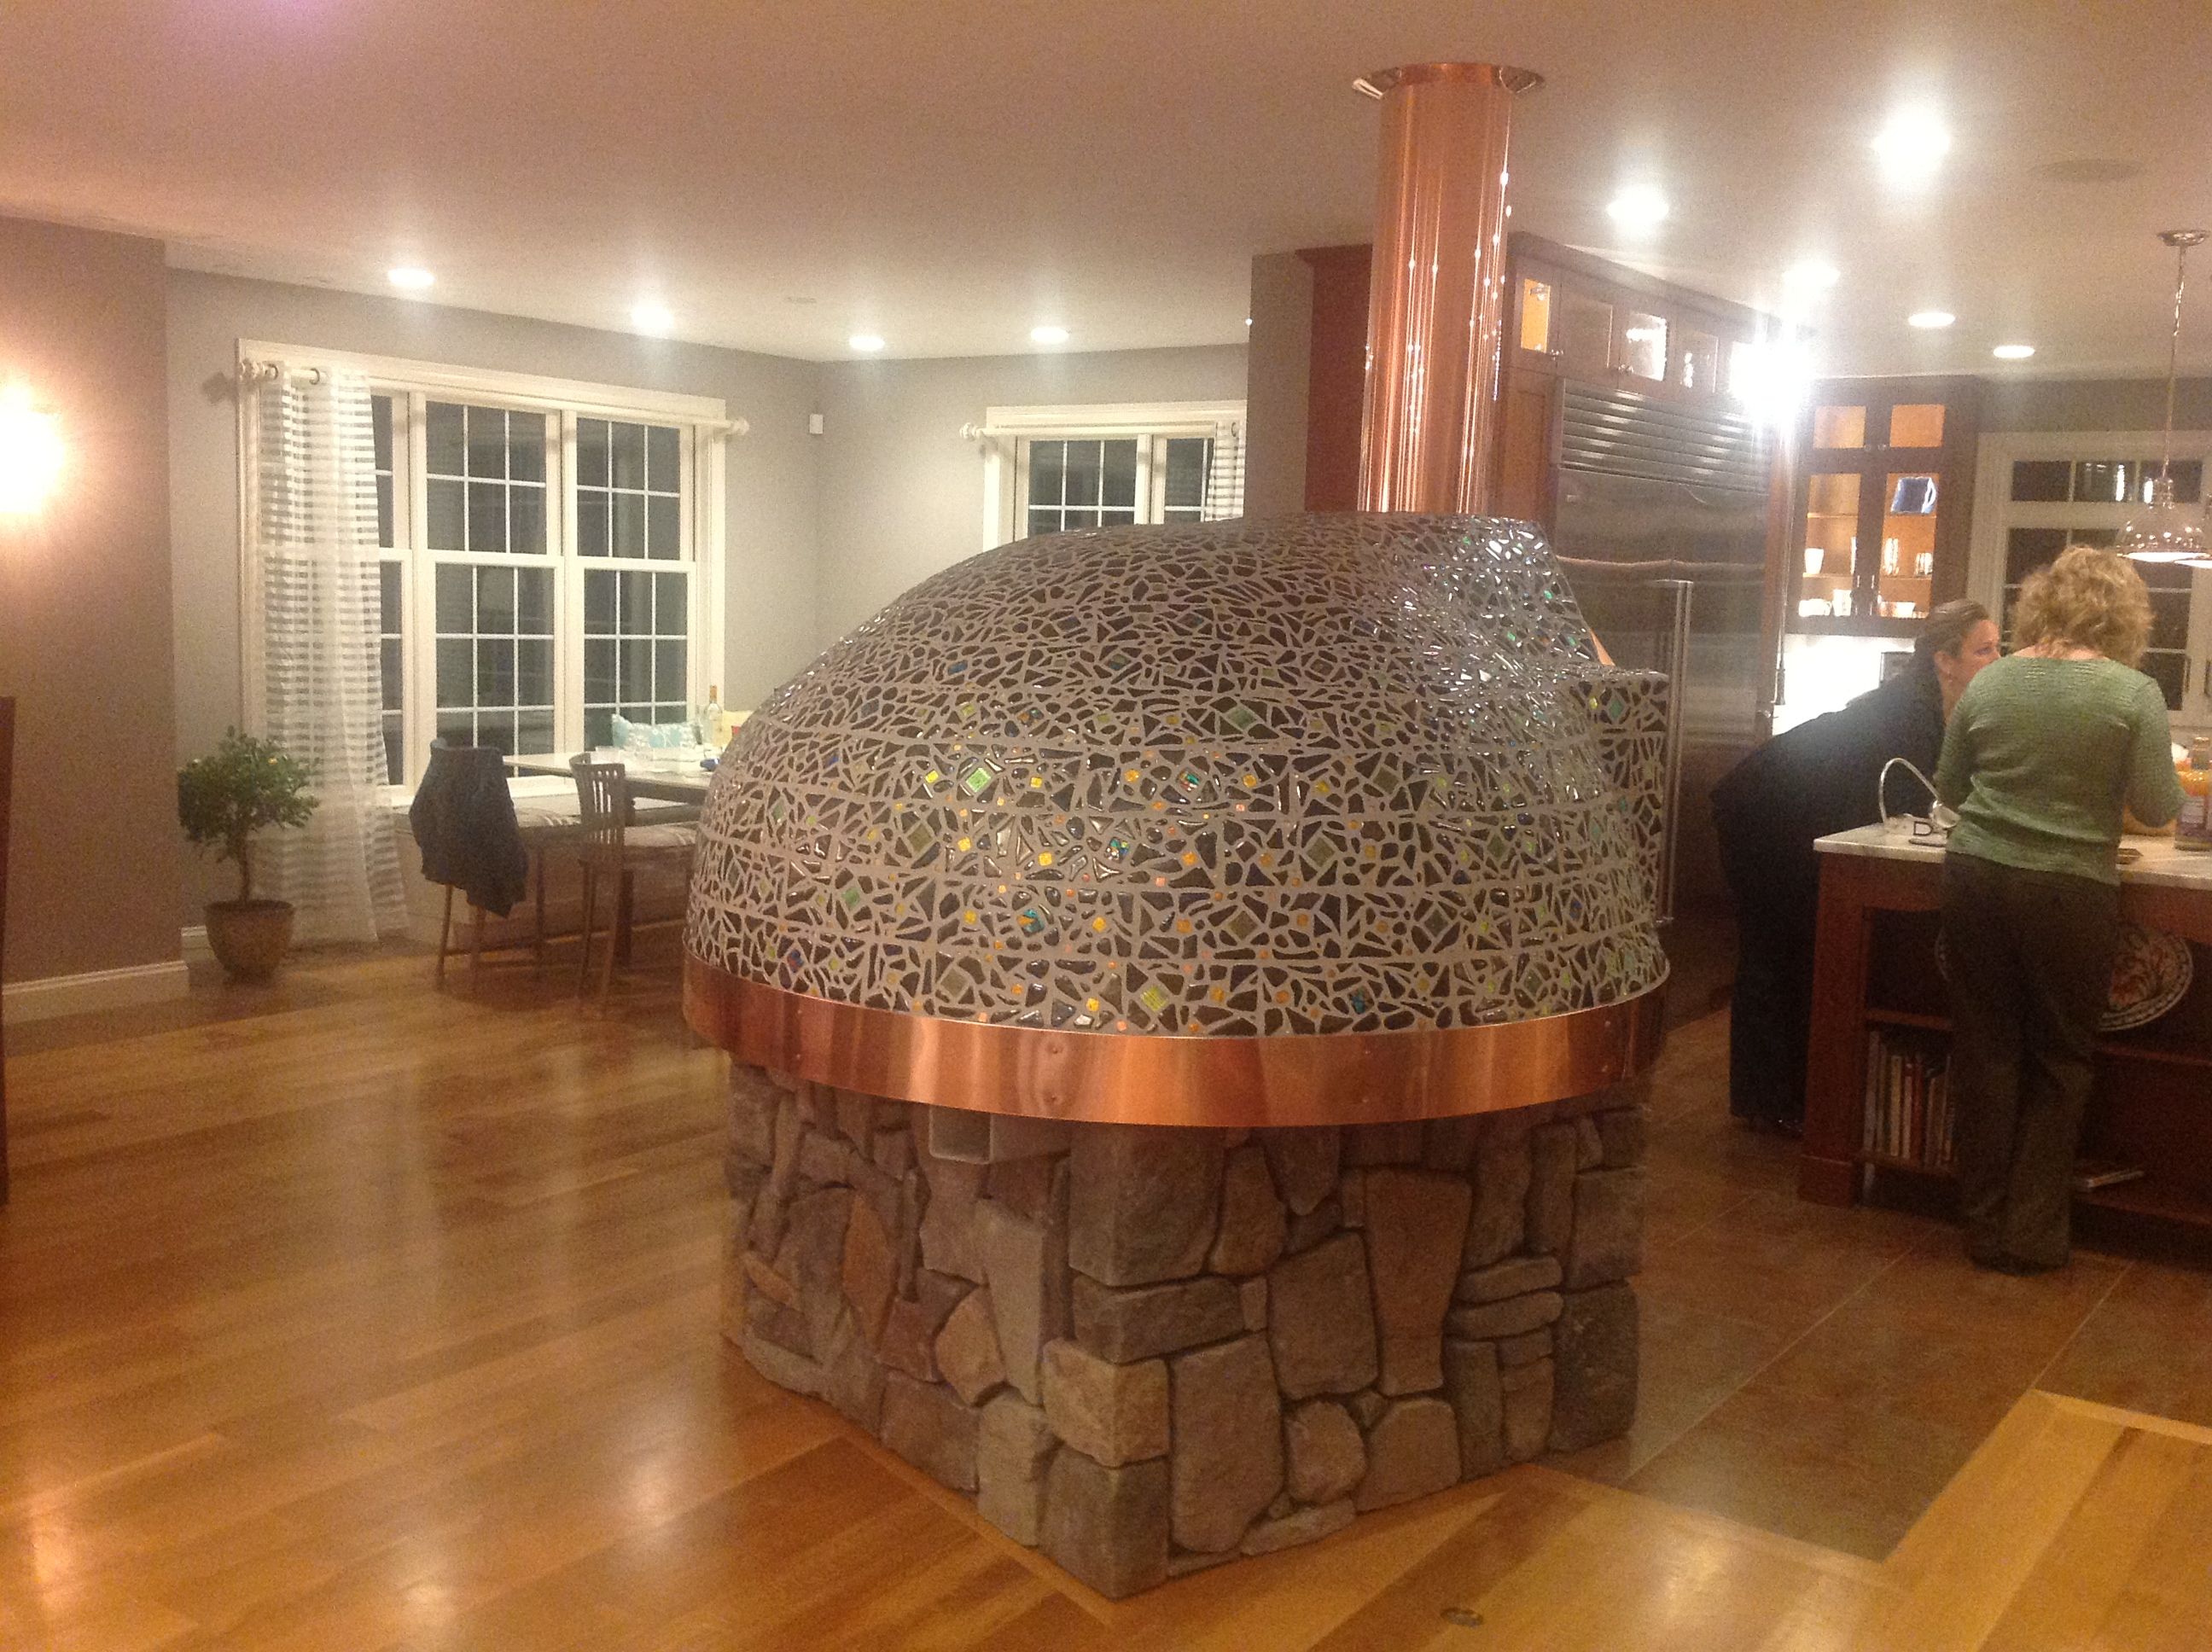 Fused Glass-Tiled Pizza Oven Adds Flavor to Bolton, MA Home